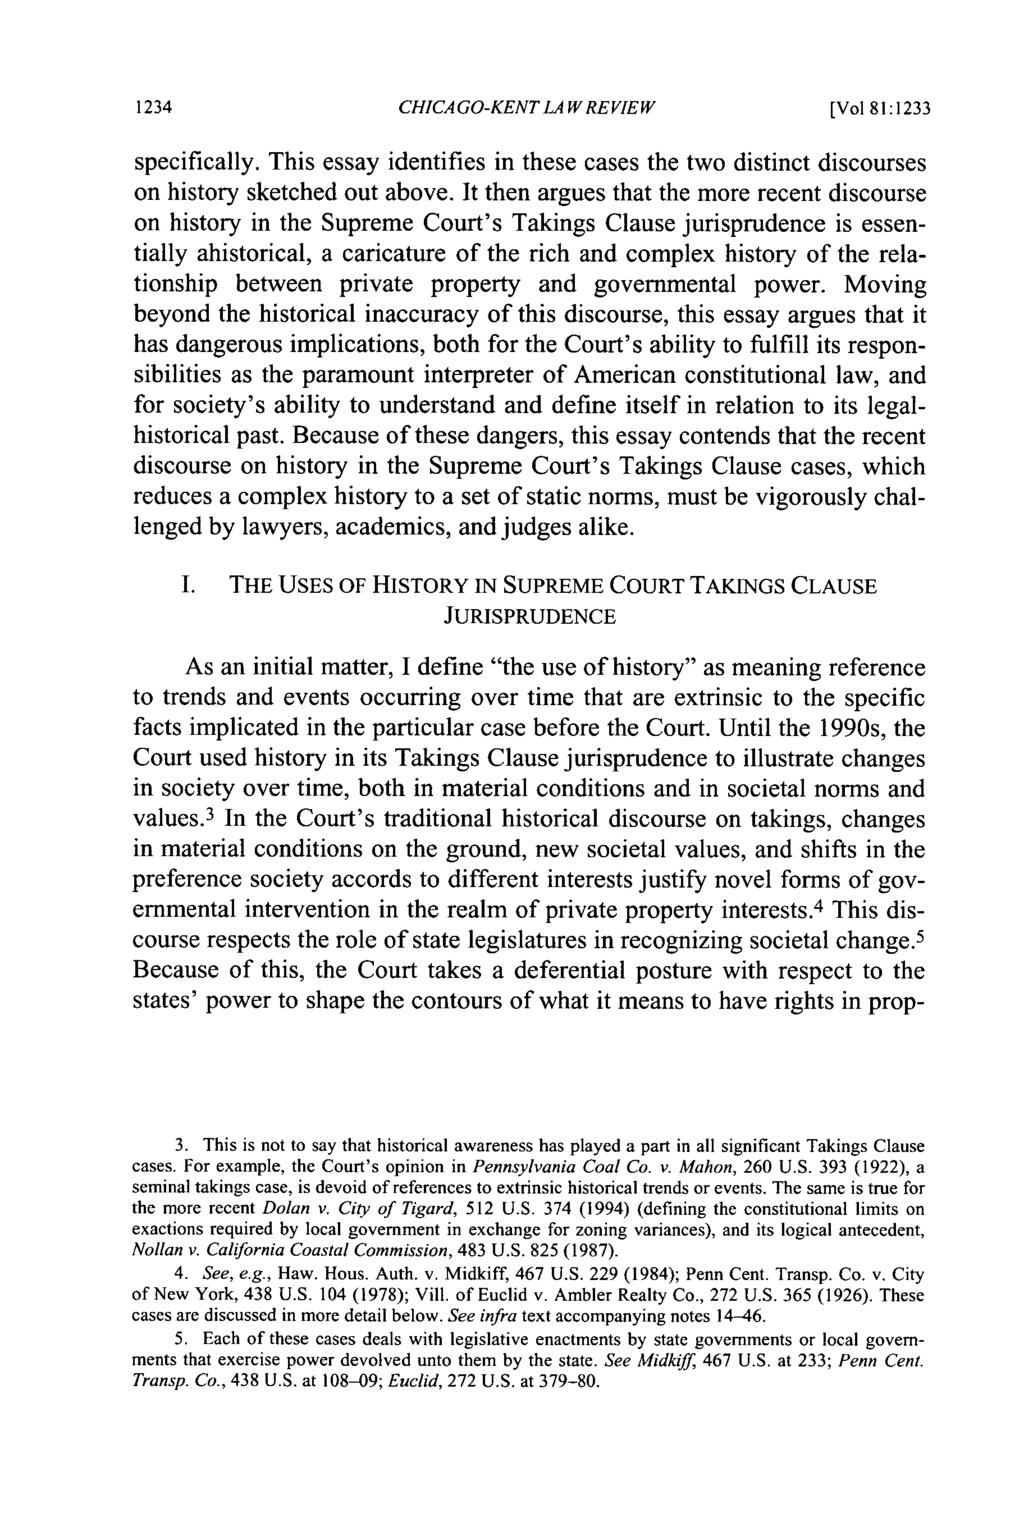 CHICAGO-KENT LA WREVIEW [Vol 81:1233 specifically. This essay identifies in these cases the two distinct discourses on history sketched out above.